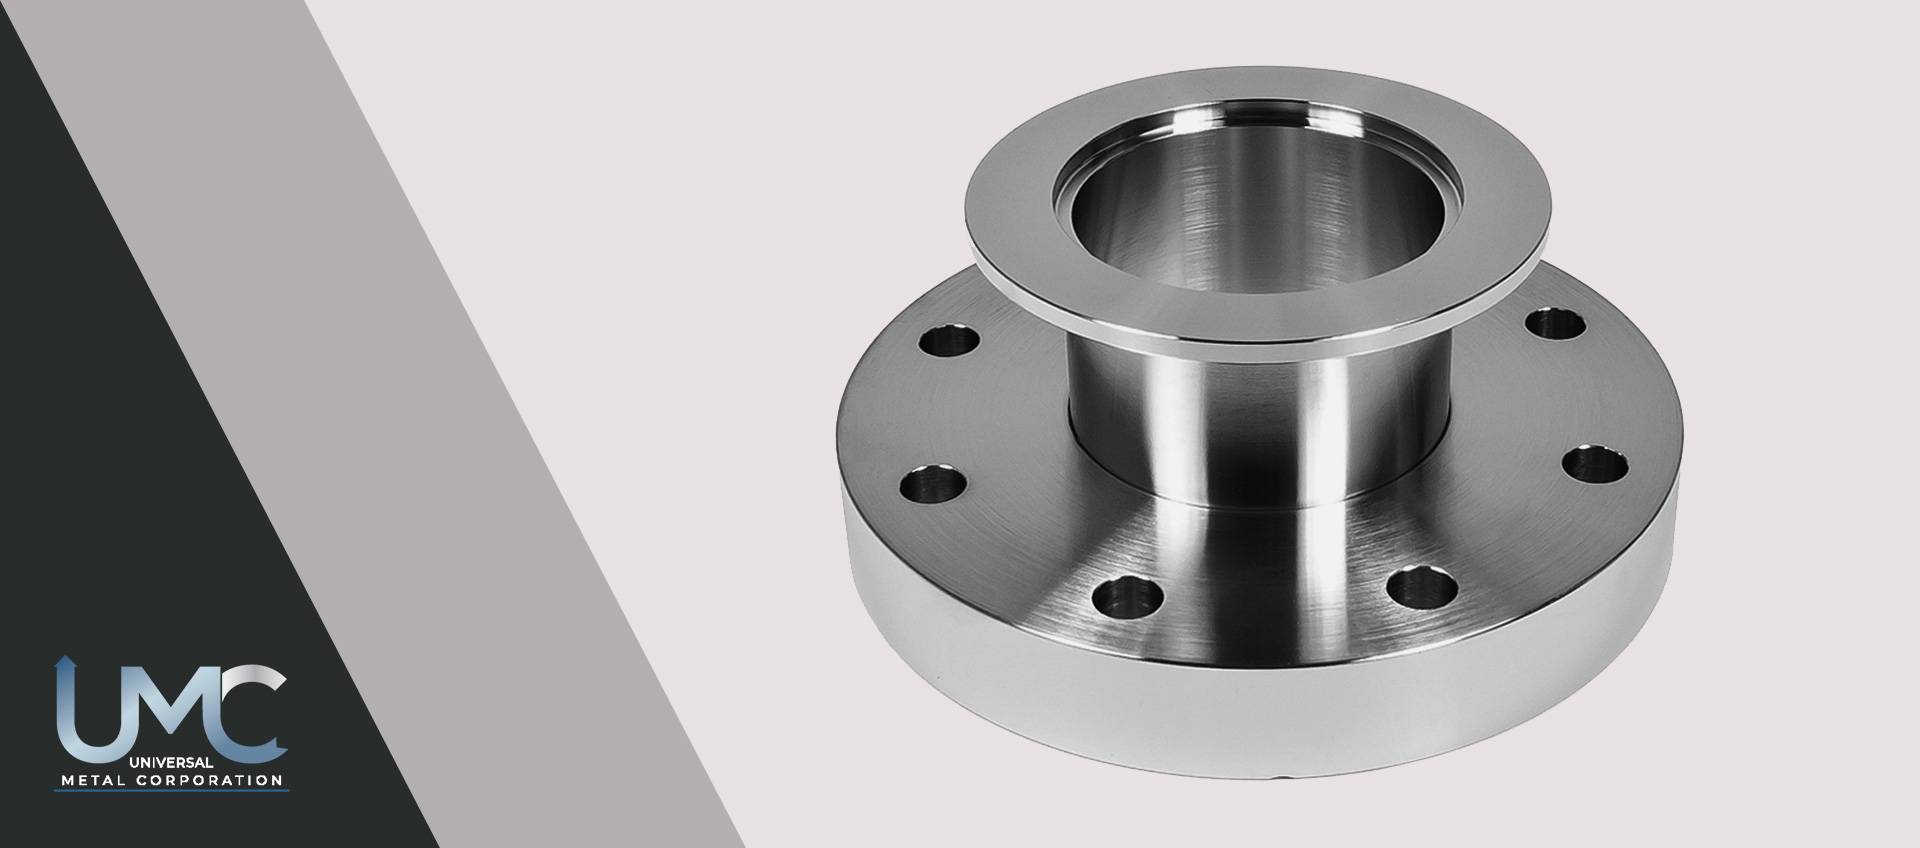 Monel Lapped Joint Flanges